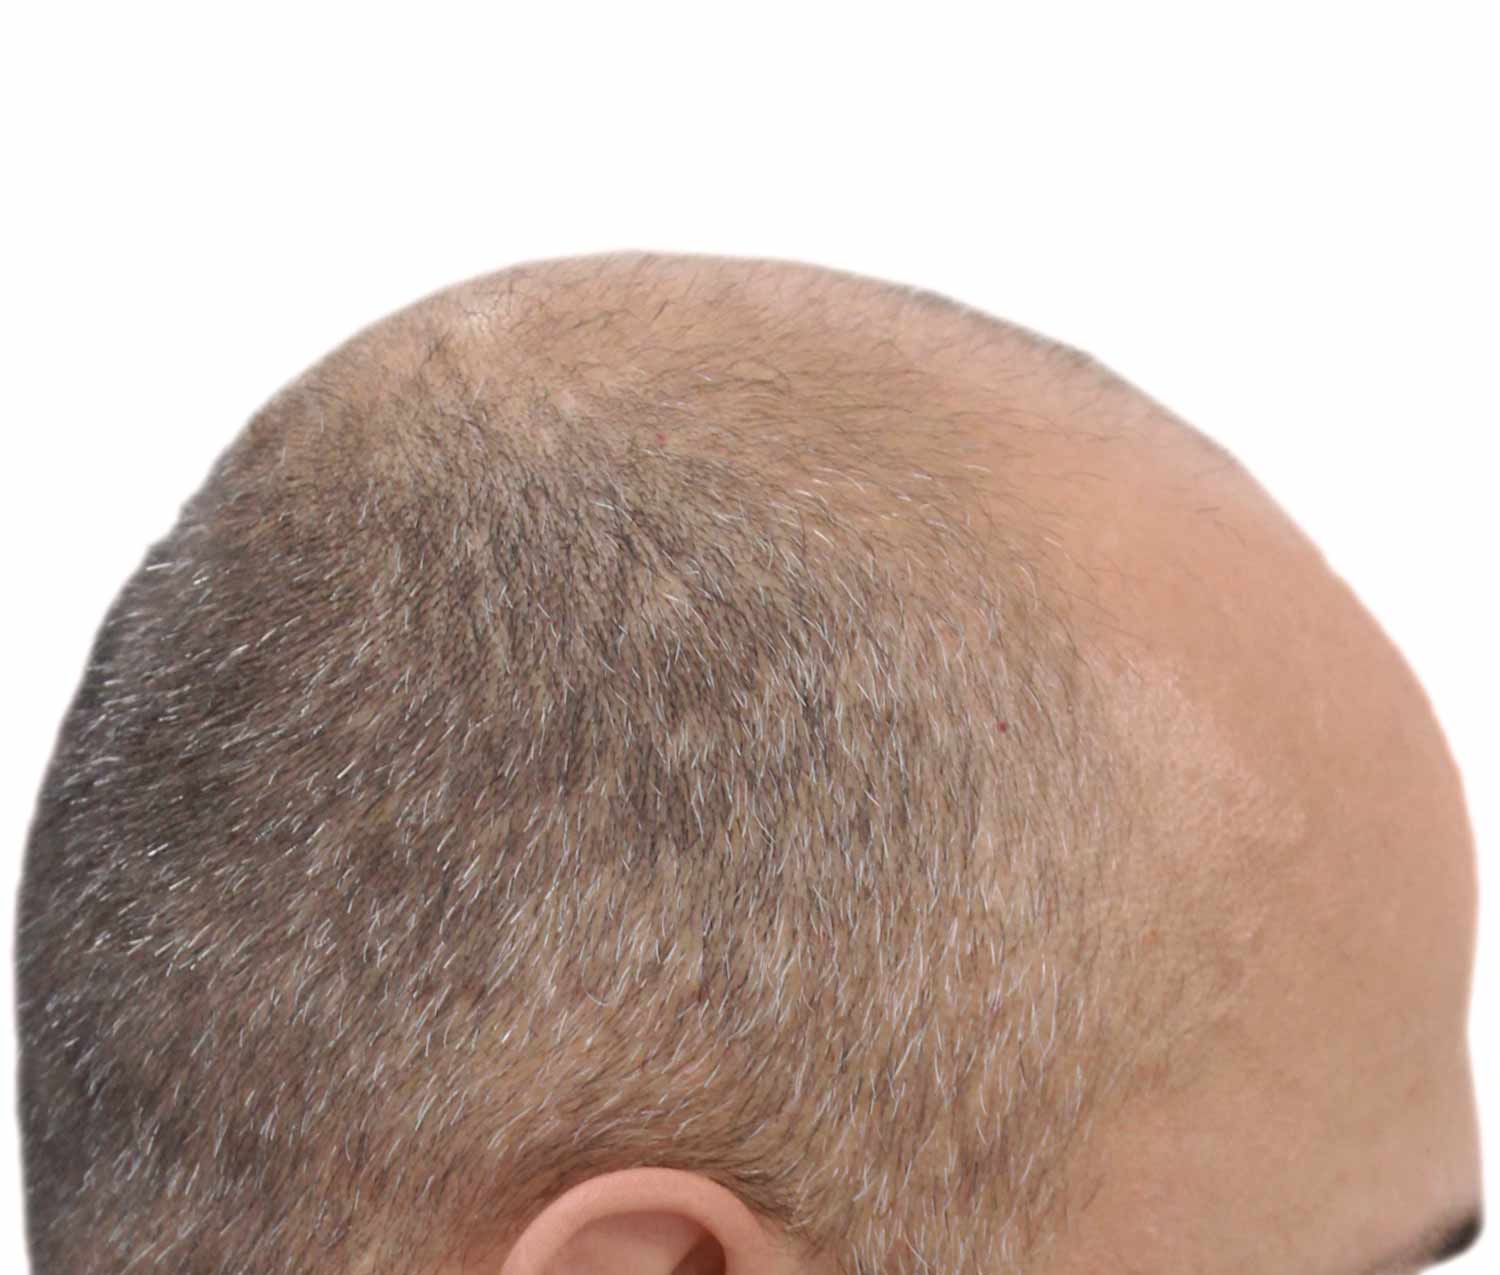 a close up of a man 's head with a bald head